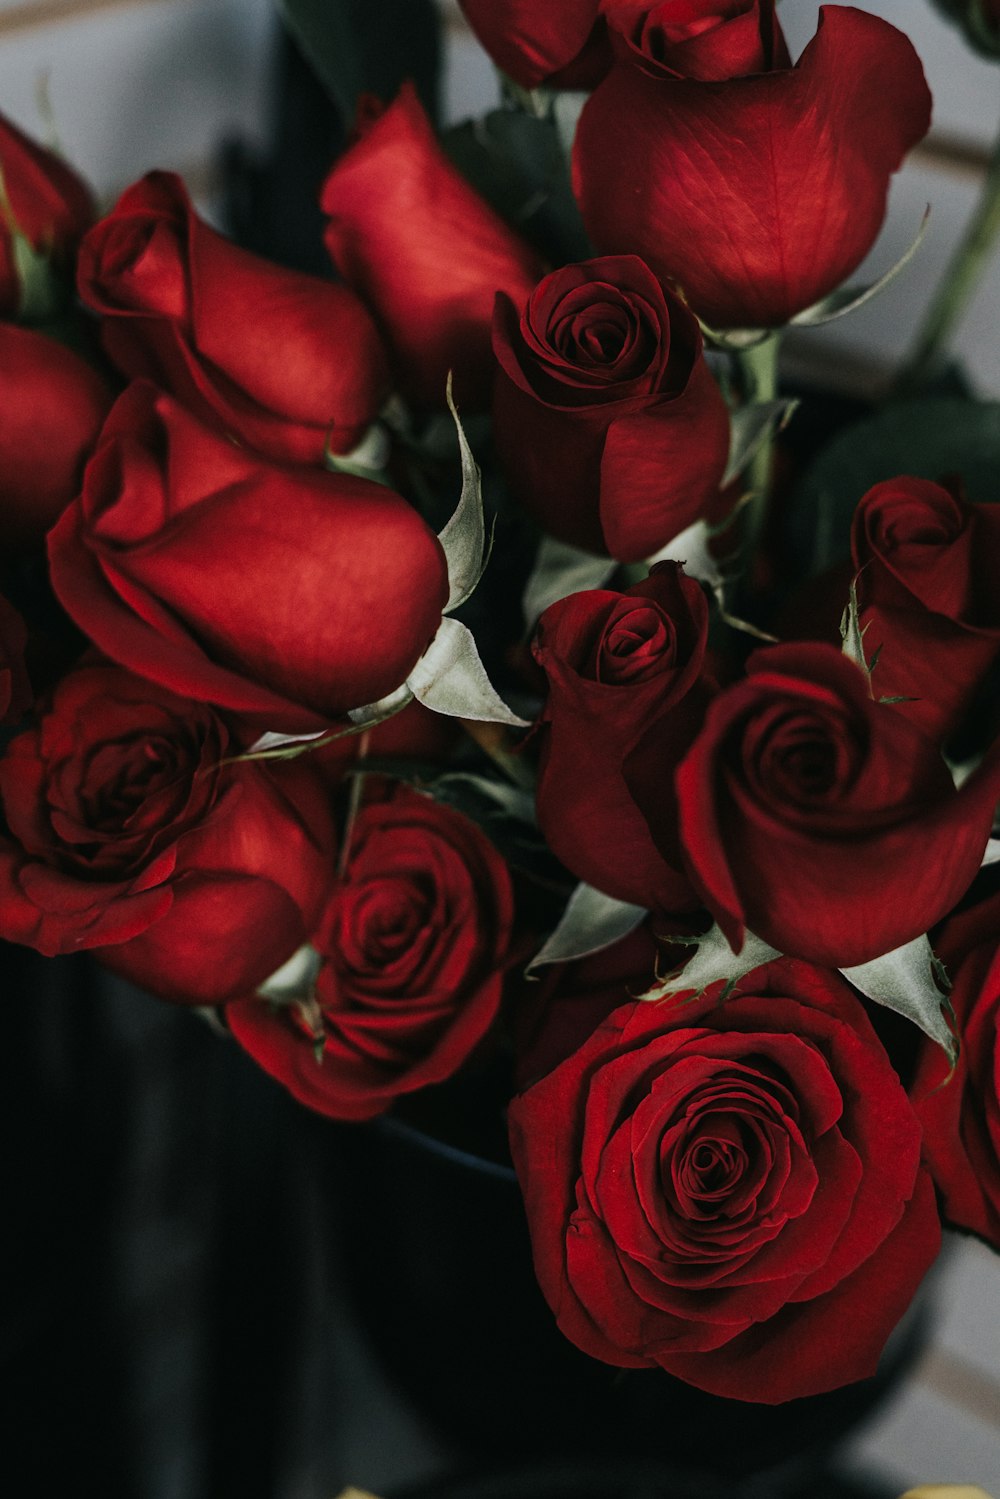 350 Romantic Rose Pictures Hq Download Free Images On Unsplash